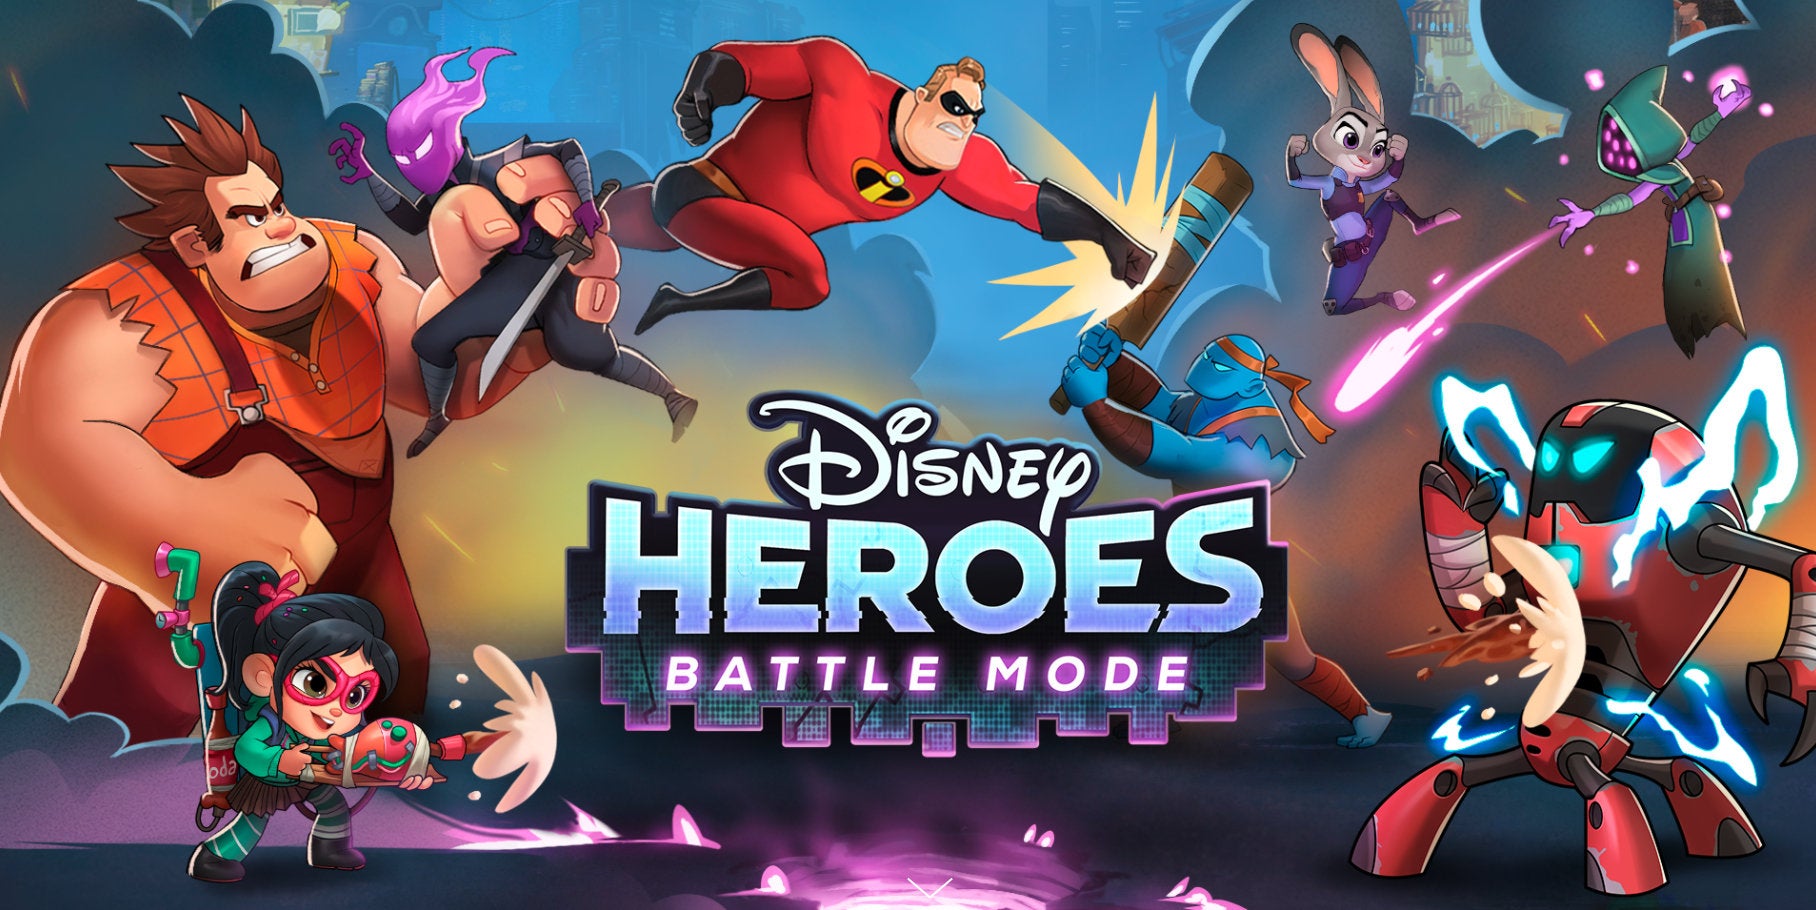 Disney Heroes: Battle Mode RPG brings together Disney and Pixar characters on Android and iOS